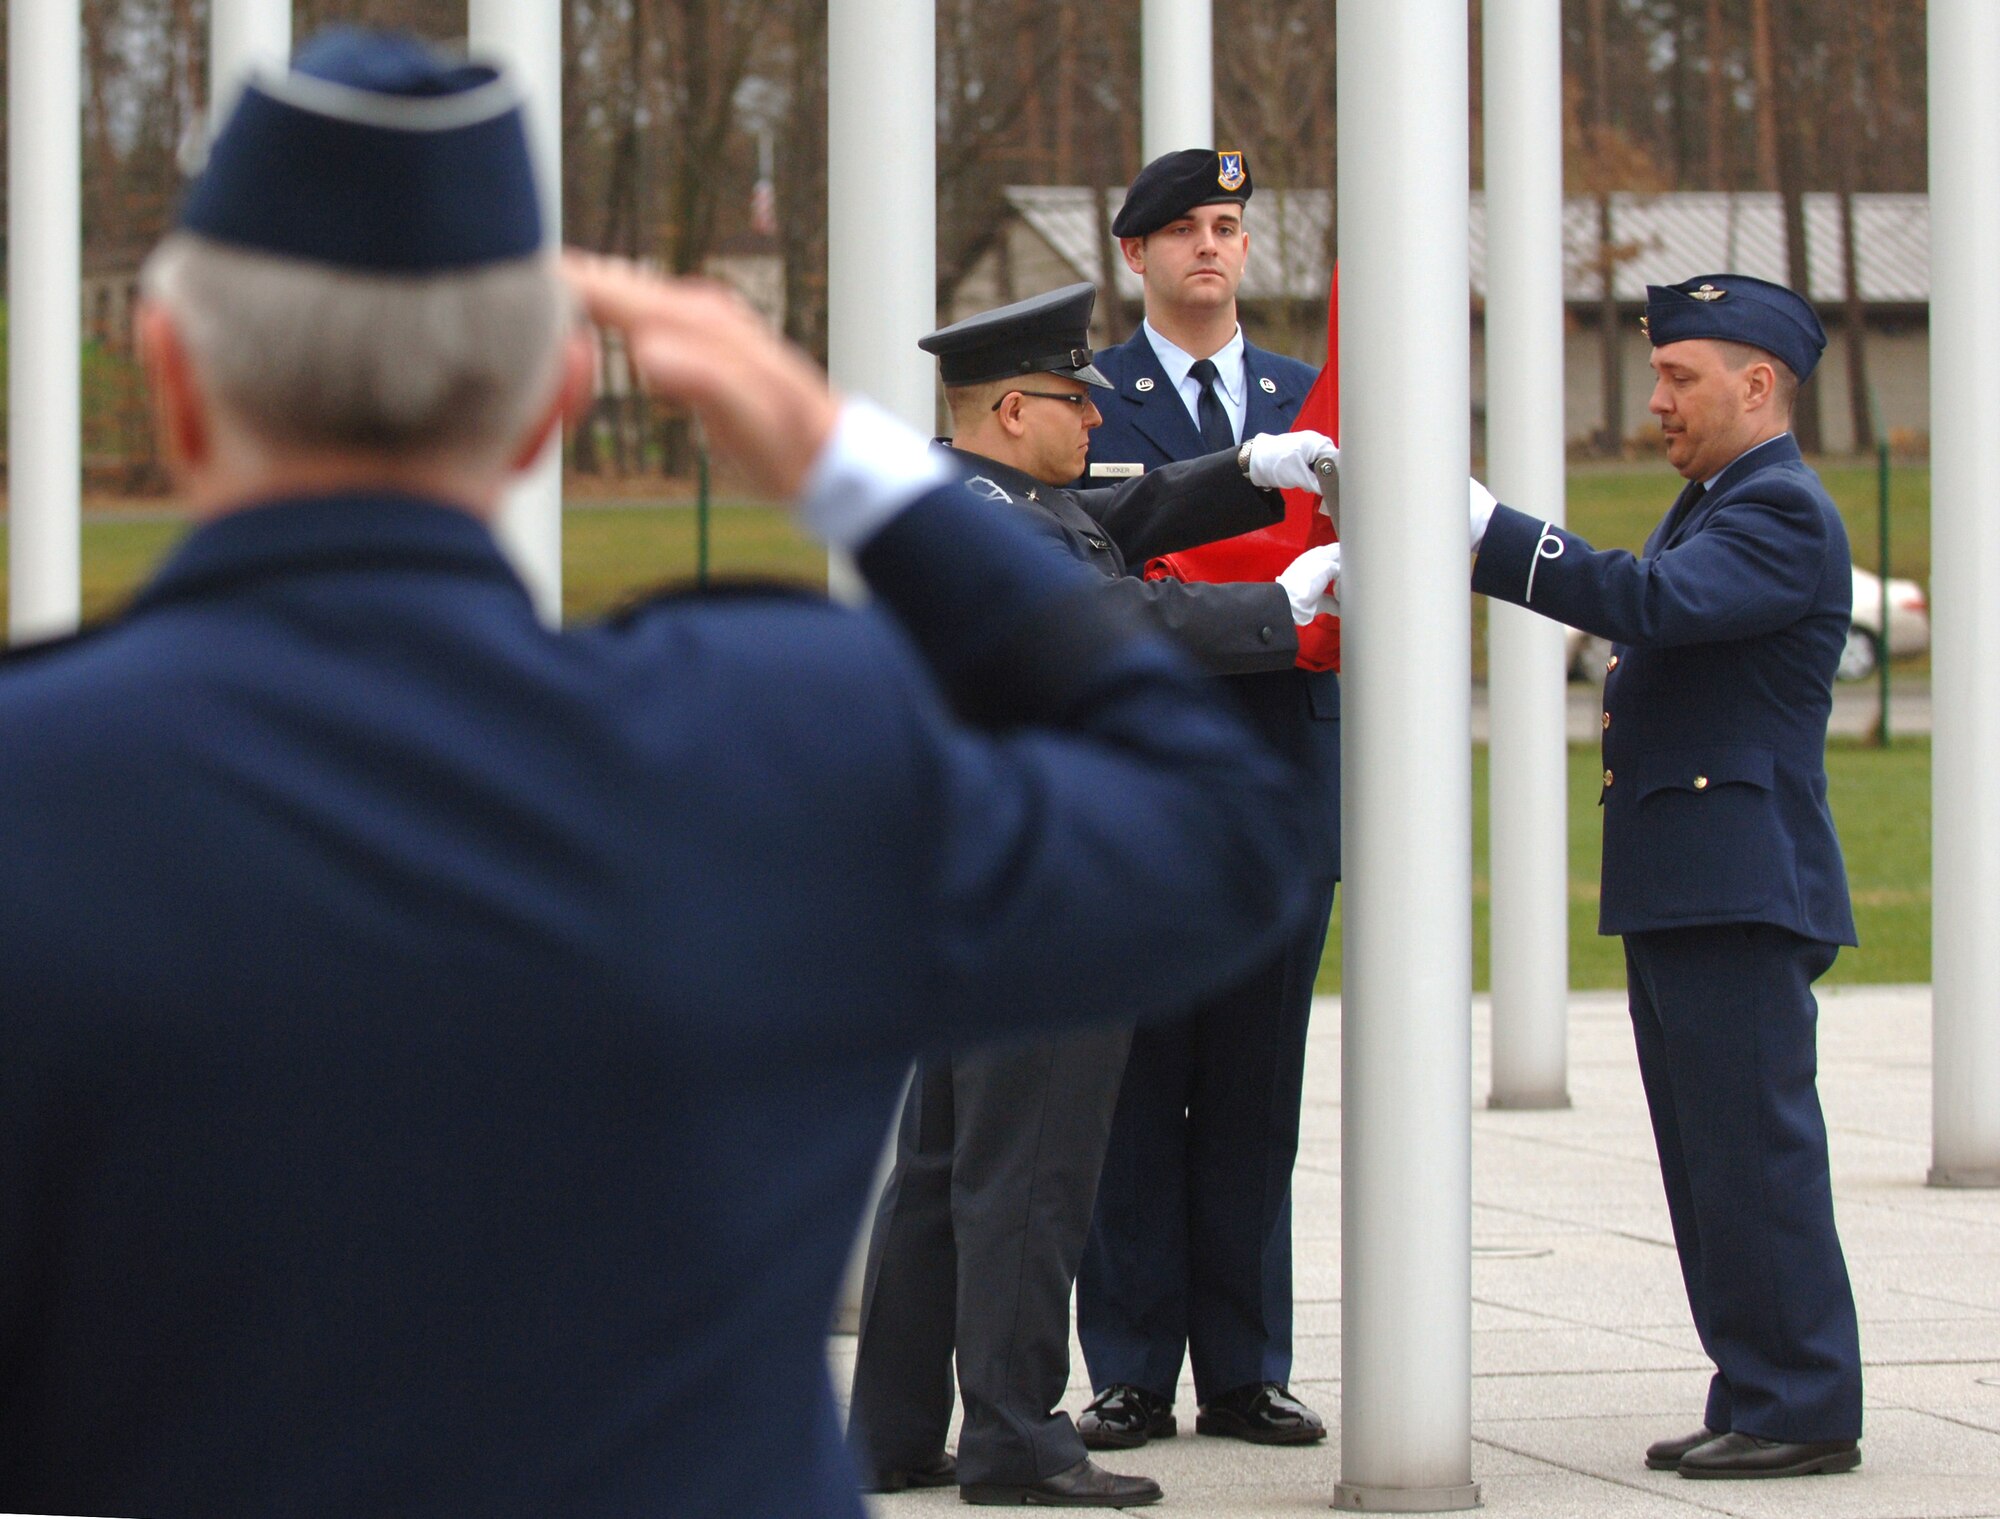 Gen. Roger A. Brady (foreground), commander of U.S. Air Forces in Europe and NATO Allied Air Component Command, salutes as (l-r) Polish Air Force Staff Sgt. Arek Sarkowski, U.S. Air Force Senior Amn. Andrew Tucker, and Belgian Air Force Adjutant Philip Van Huyck hoist the Albanian flag during an April 8, 2009, ceremony at Ramstein Air Base, Germany, to recognize the accession of Croatia and Albania as the 27th and 28th members of NATO. (Department of Defense photo by Master Sgt. Scott Wagers / Defense Media Activity-Europe)